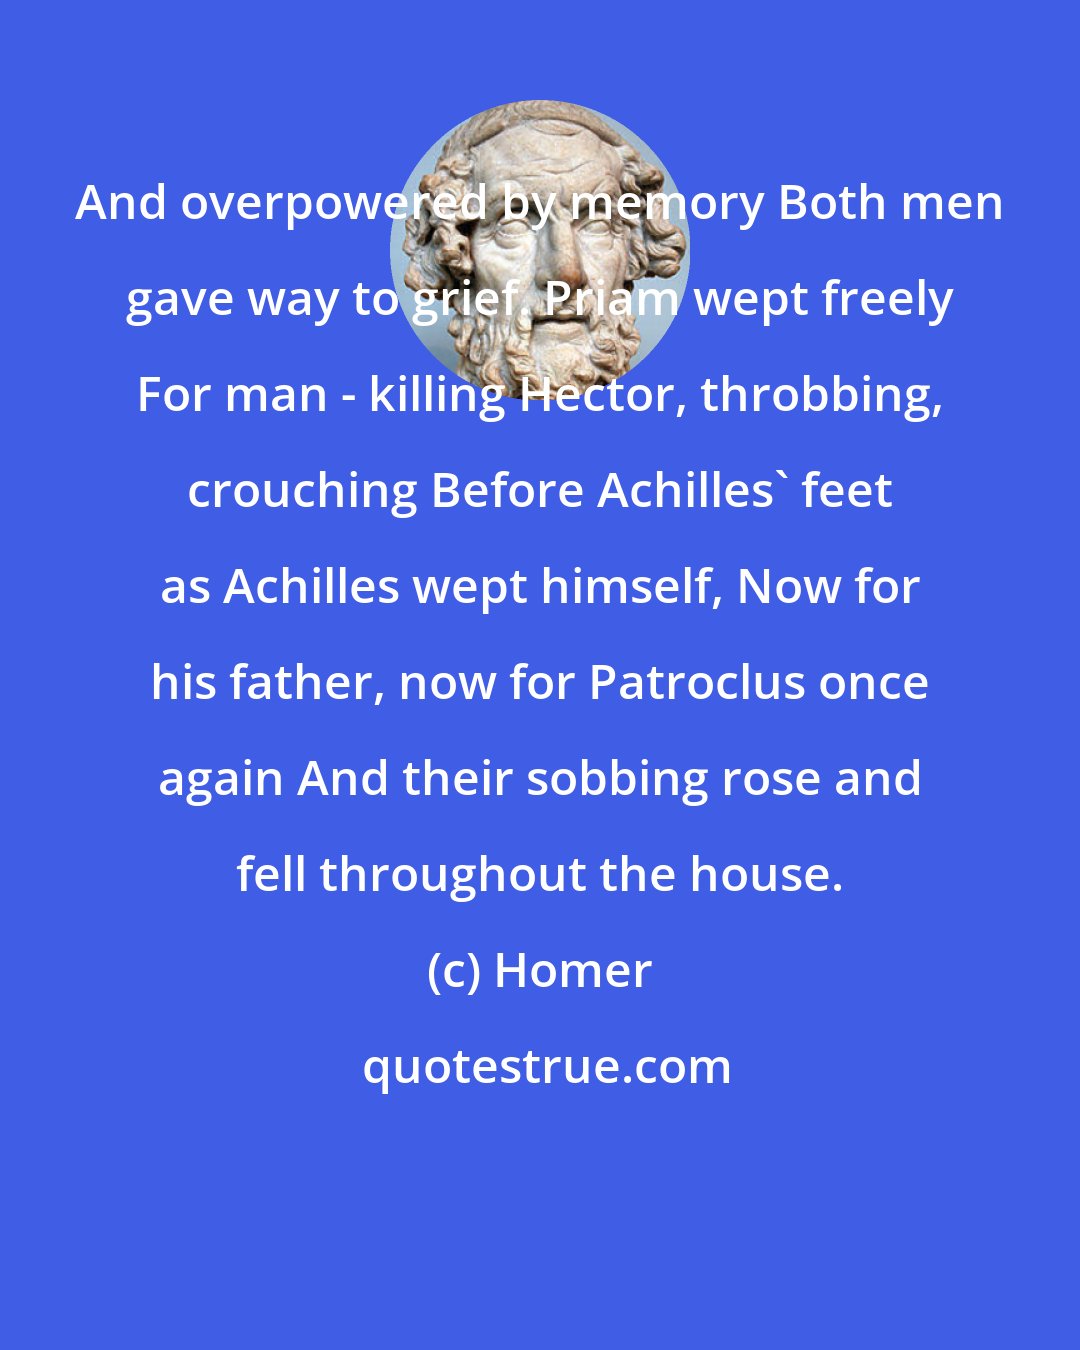 Homer: And overpowered by memory Both men gave way to grief. Priam wept freely For man - killing Hector, throbbing, crouching Before Achilles' feet as Achilles wept himself, Now for his father, now for Patroclus once again And their sobbing rose and fell throughout the house.